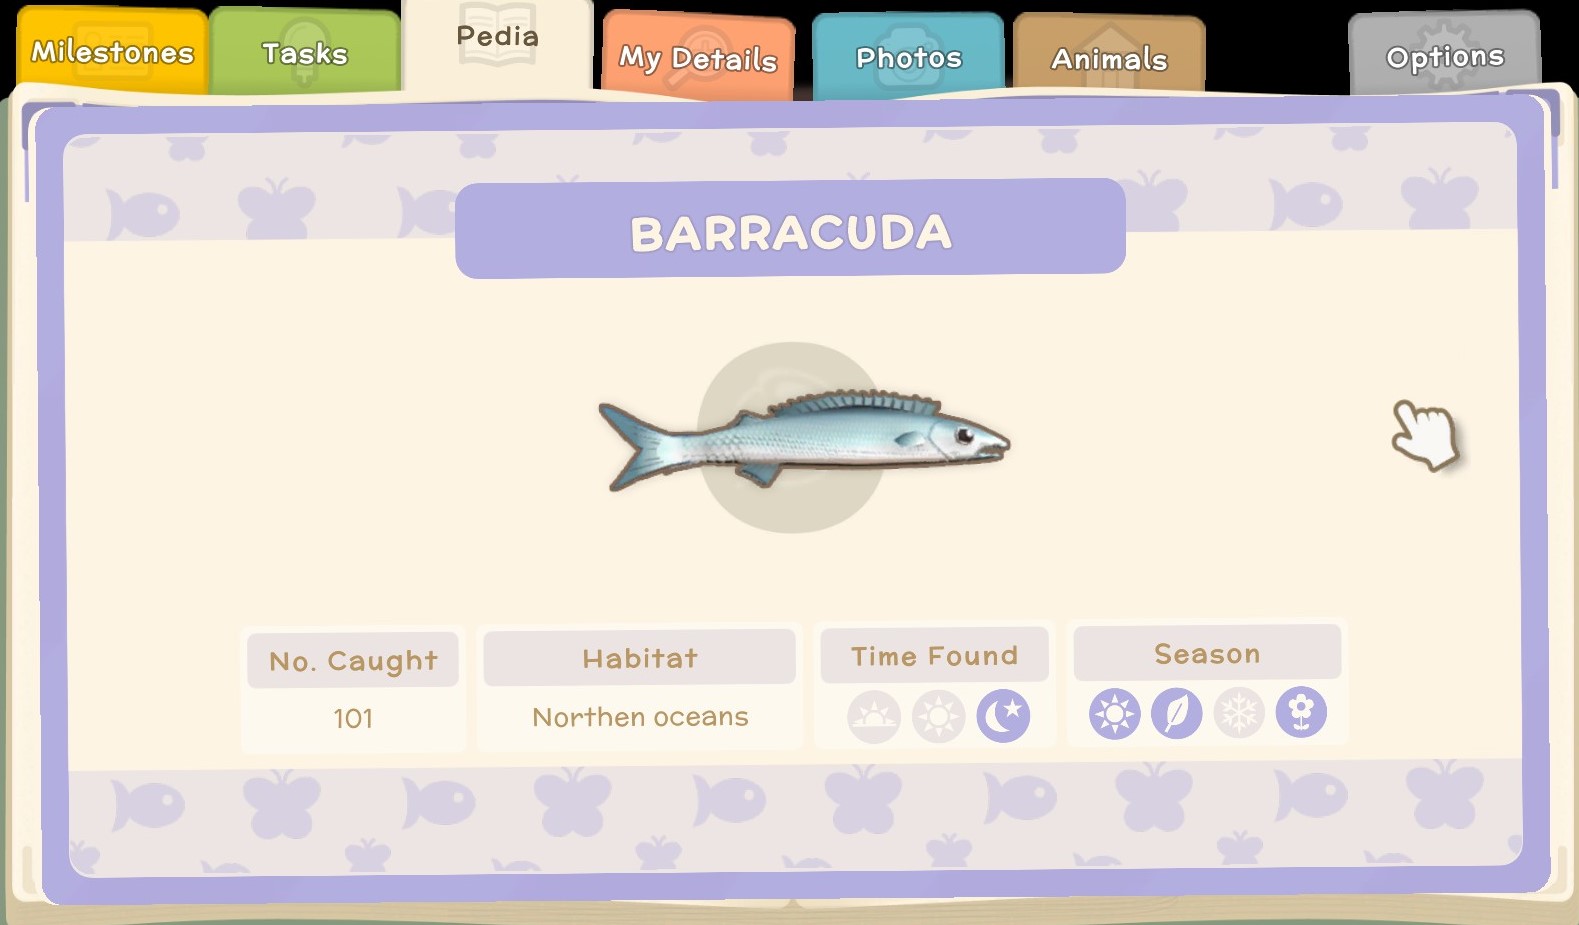 Dinkum - List of all the fish in the game - Pedia Fish - A1F9A70